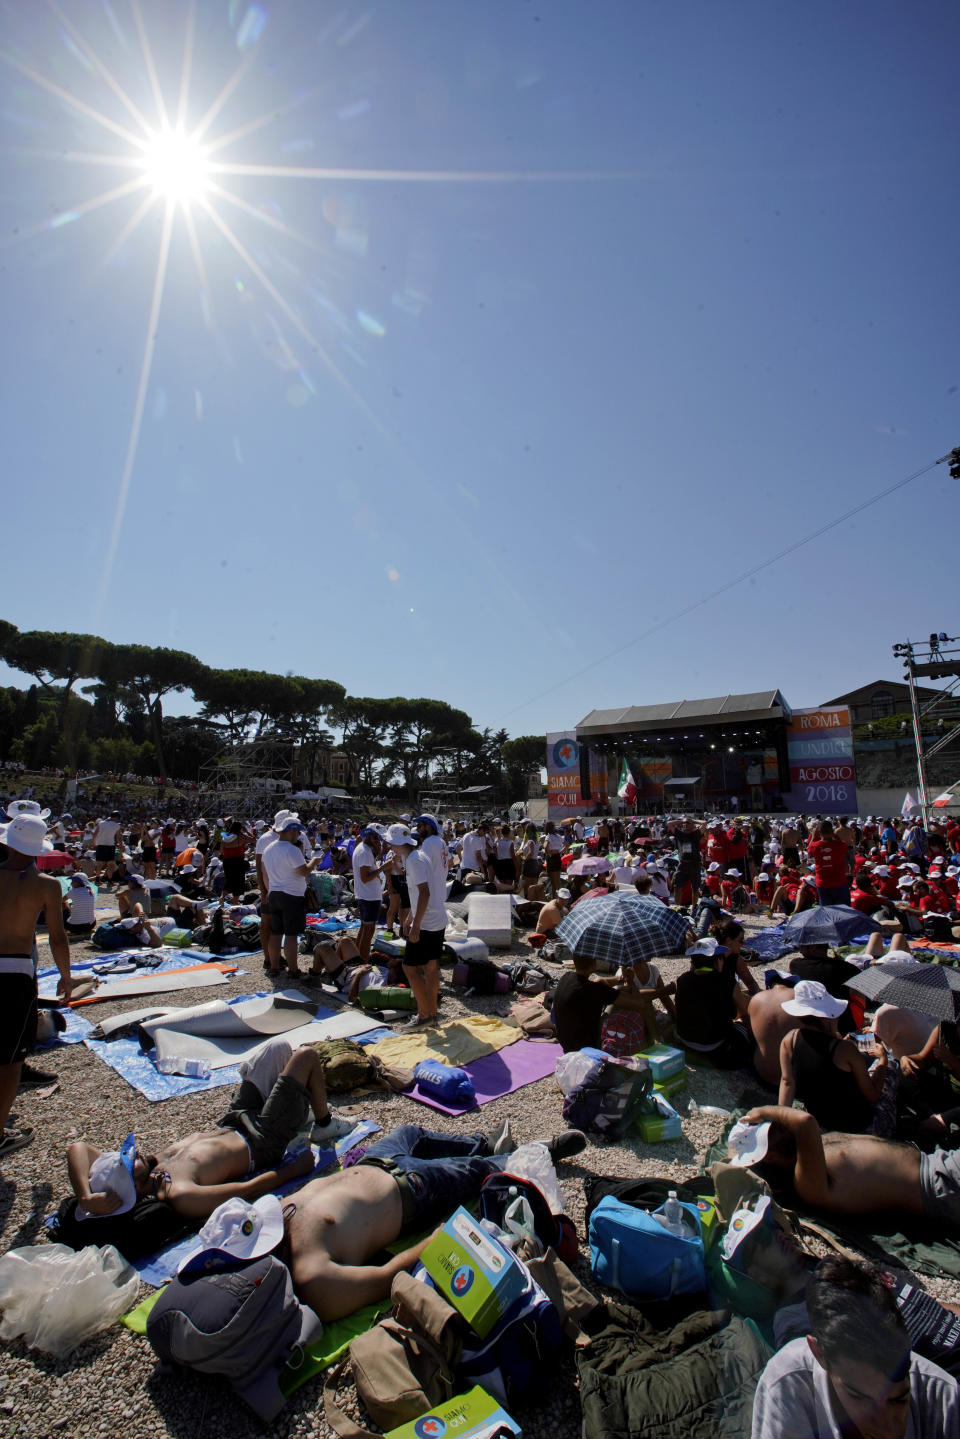 Faithful gather in Rome's Circus Maximus as they wait for the arrival of Pope Francis to lead an evening prayer vigil with youths, Saturday, Aug. 11, 2018. Thousand of youths gathered for the meeting with the pontiff in preparation for the next World Youth Day that will be held in Panama next year. (AP Photo/Andrew Medichini)